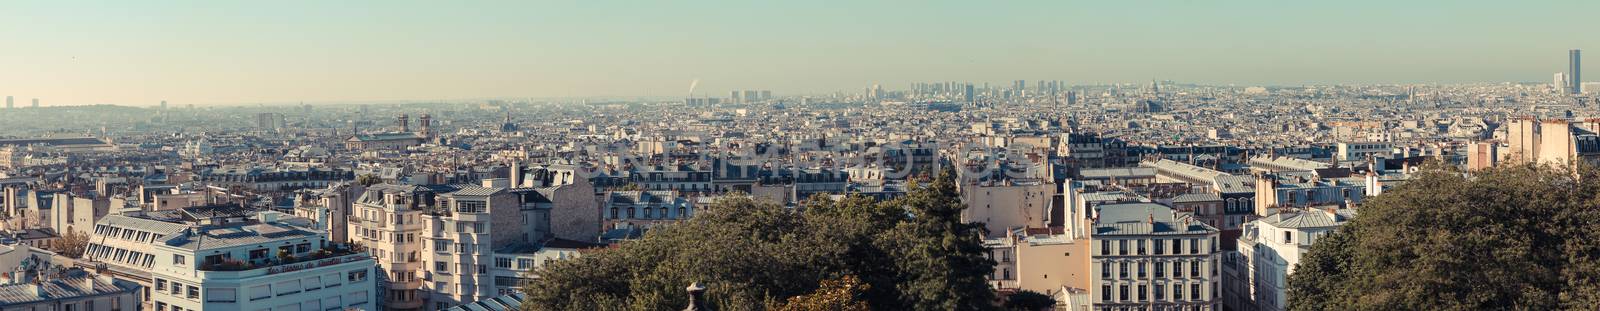 The View of Paris from above. Panorana